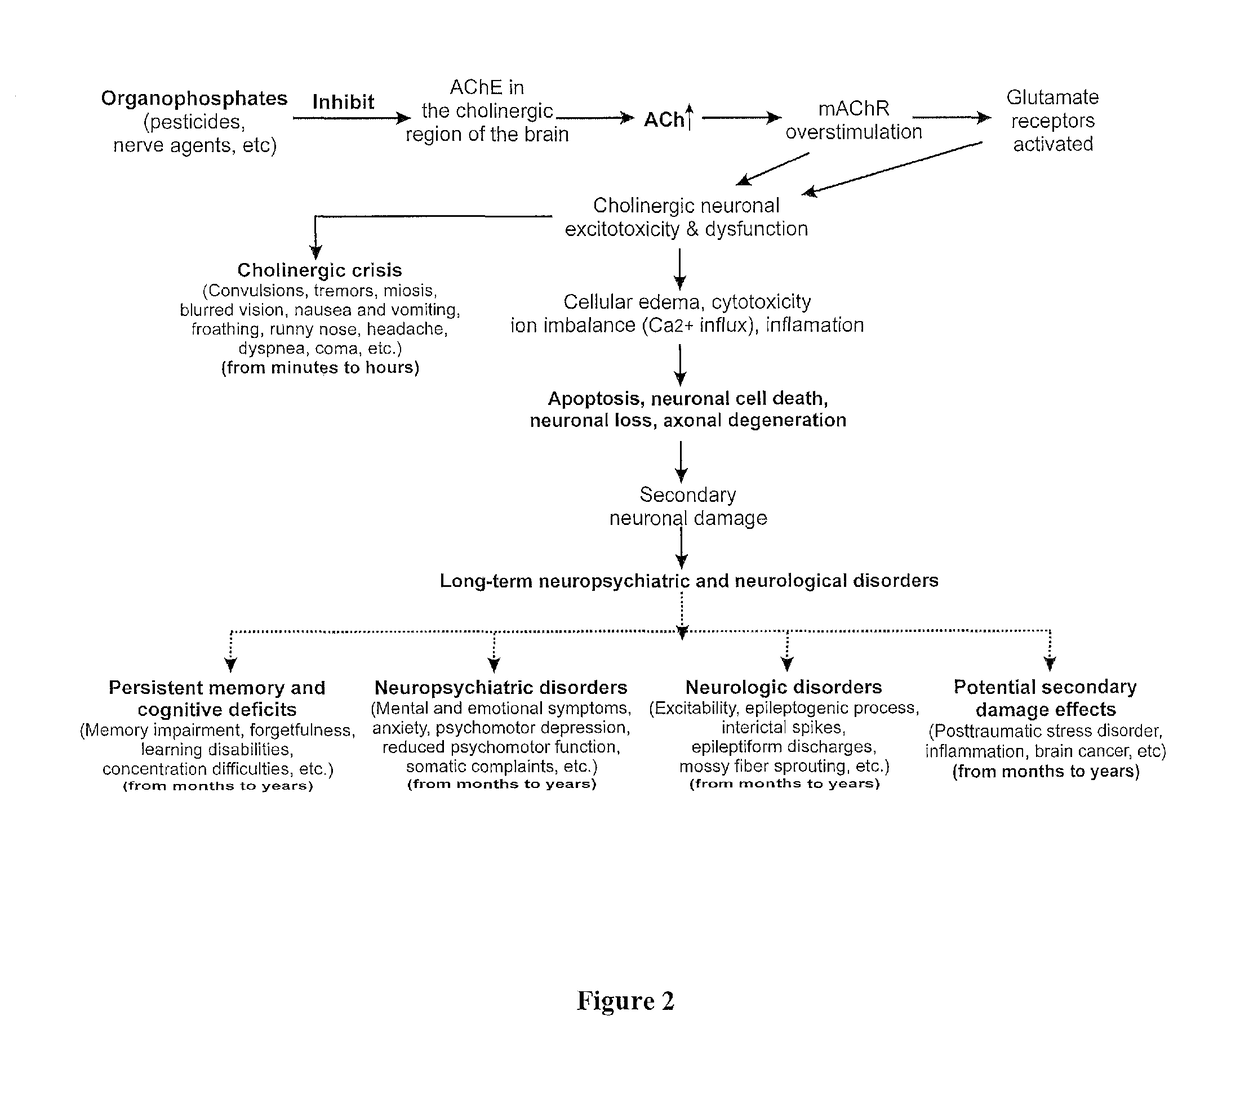 Method of treating organophosphate intoxication by administration of neurosteroids